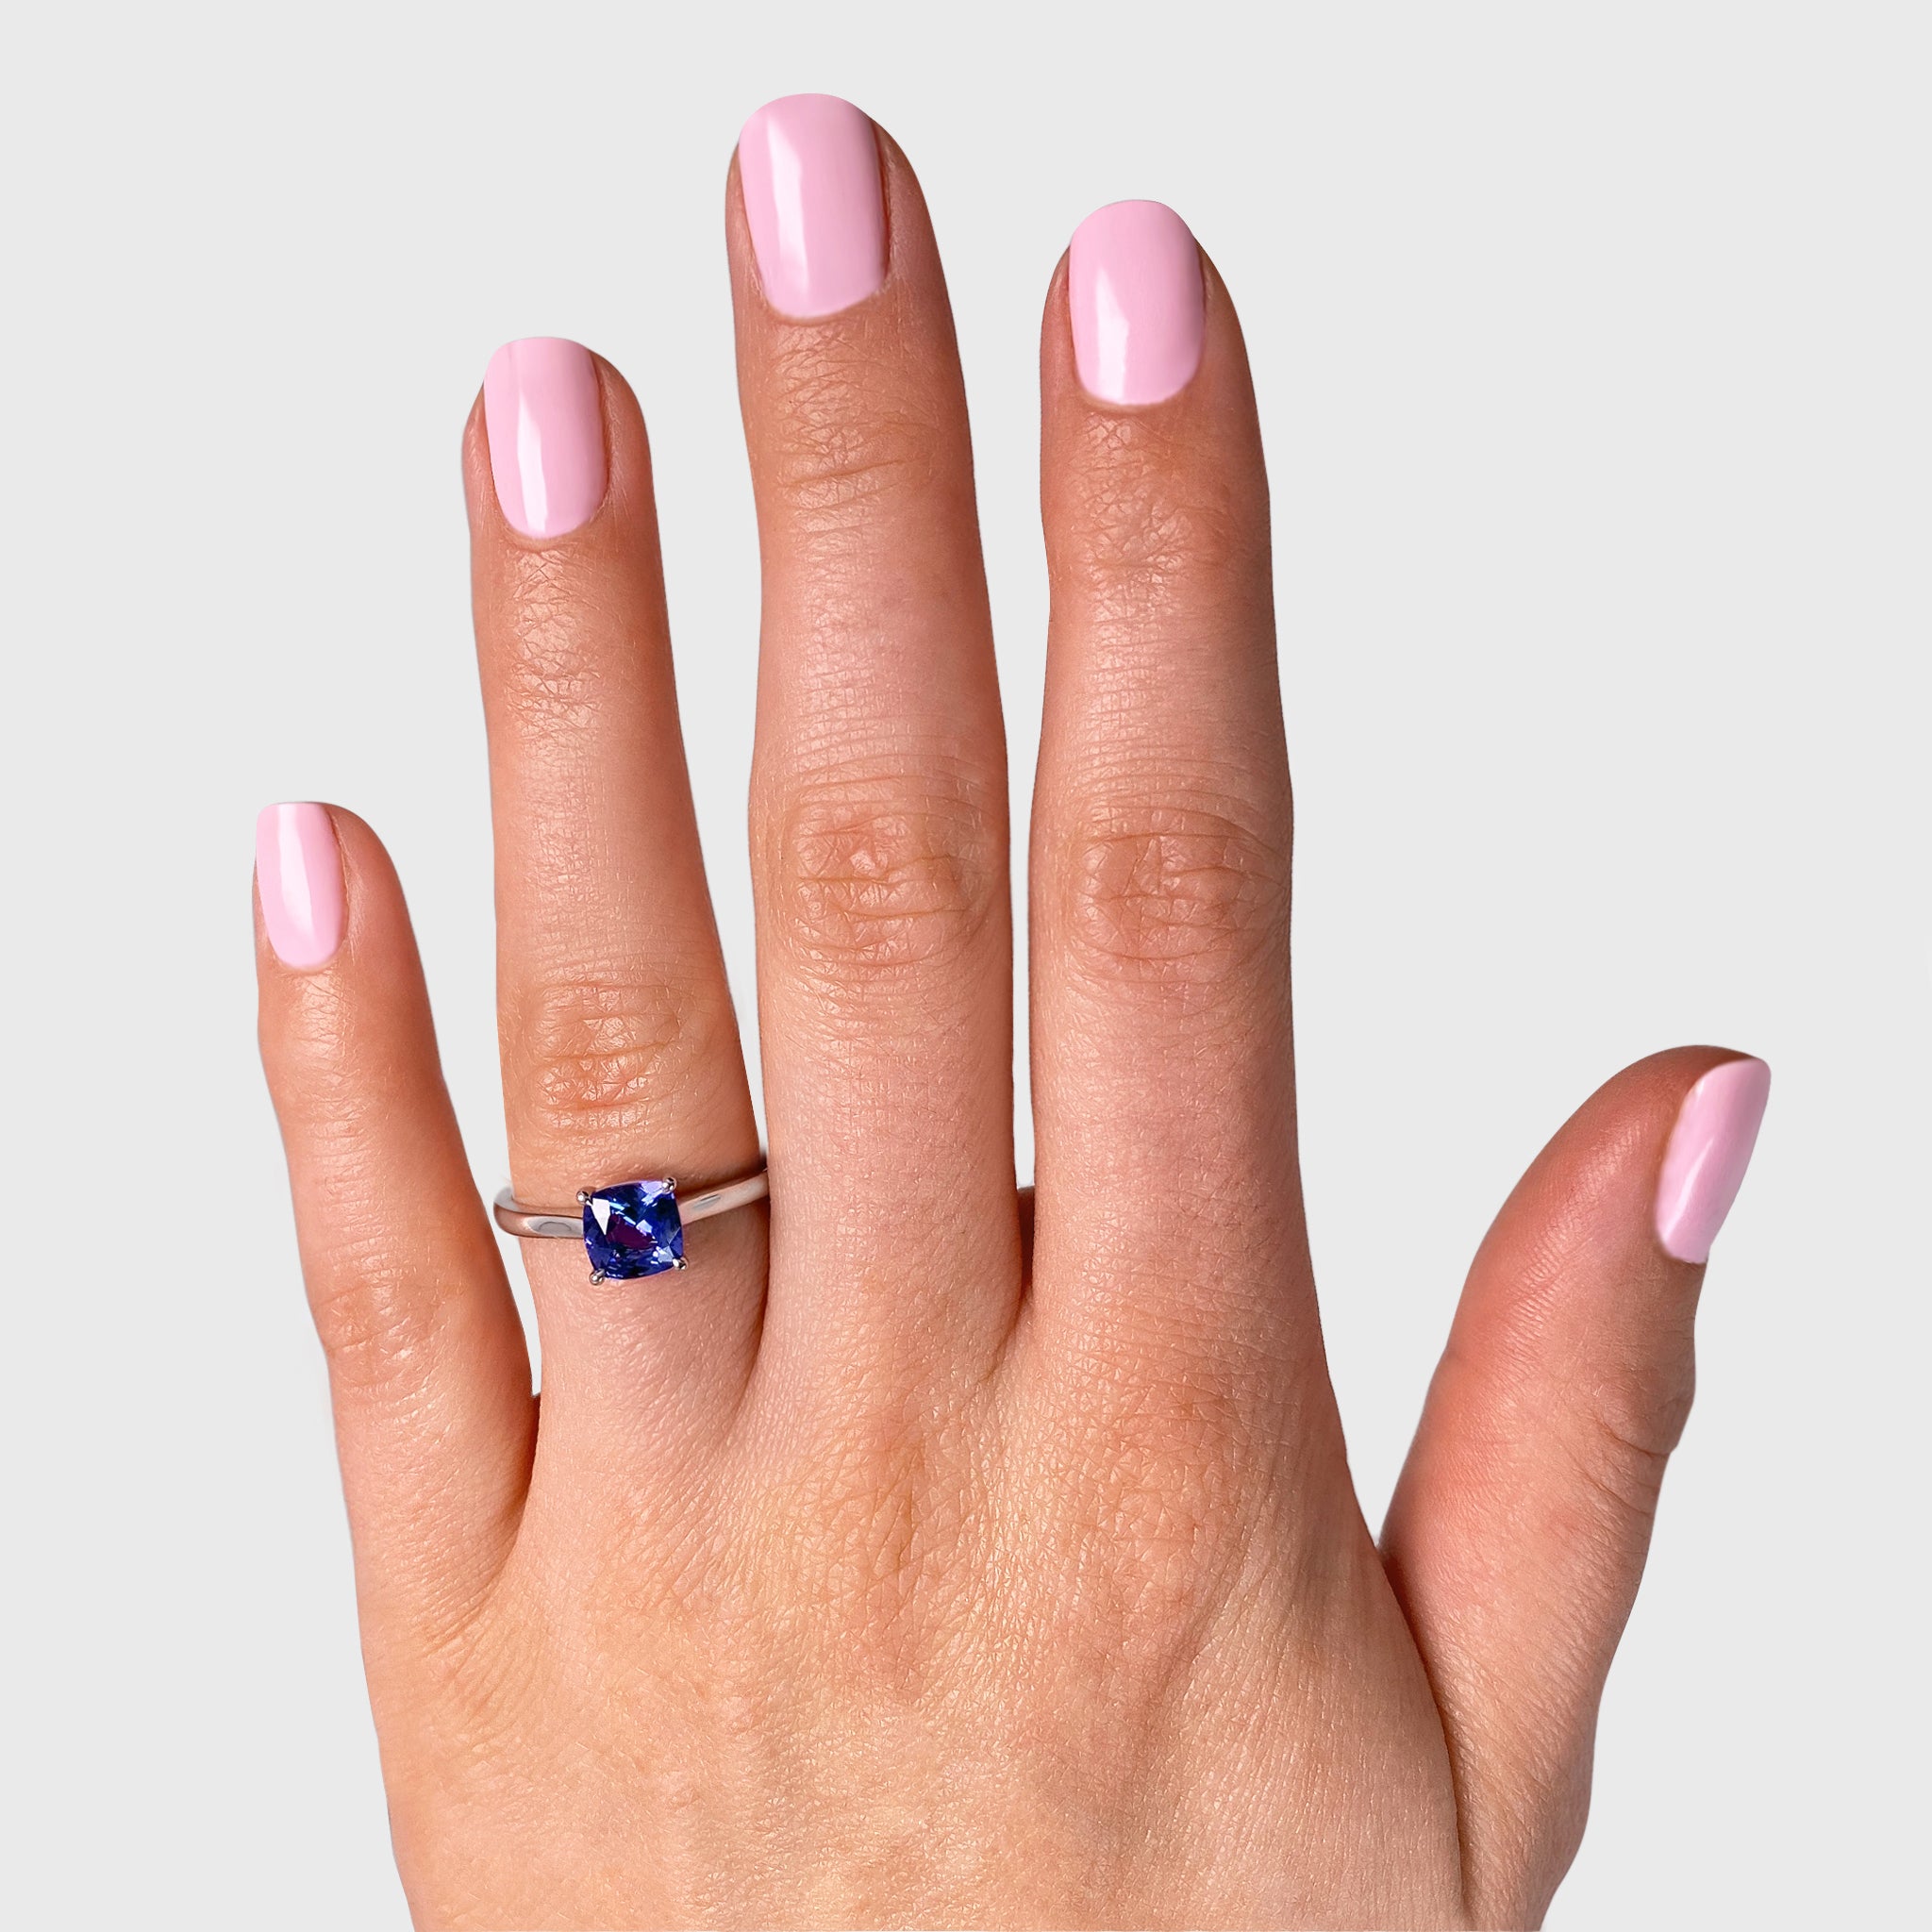 Shimansky - Women Wearing the Tanzanite Square Cushion Cut Solitaire Ring 1.00ct crafted in 14K White Gold